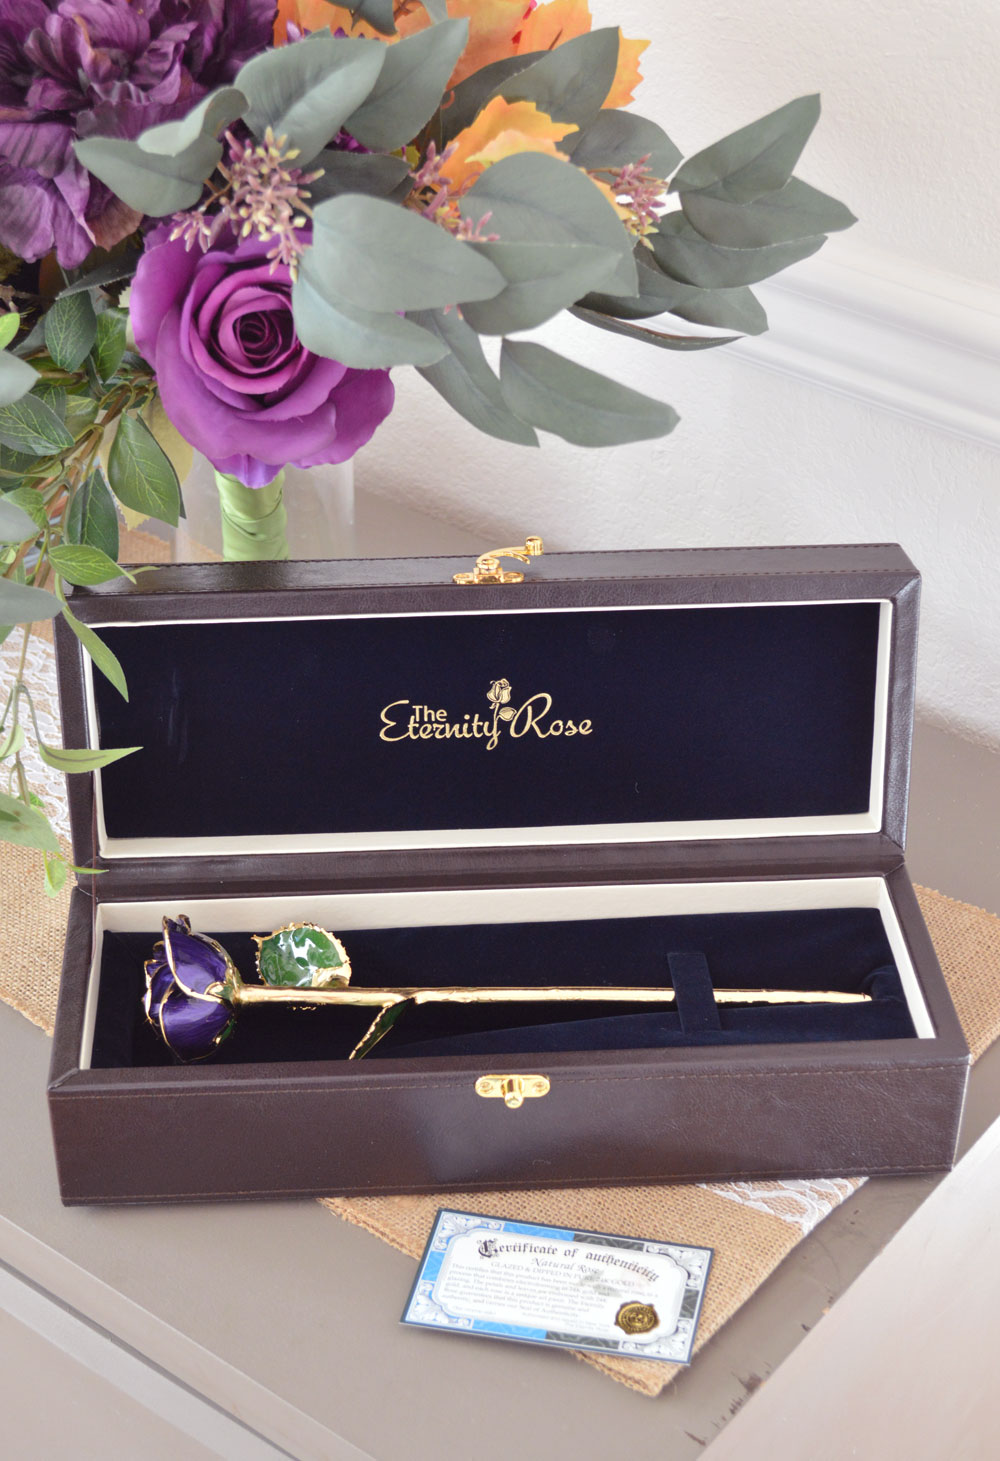 Eternity Rose 24k gold dipped blooms come in a gorgeous display box